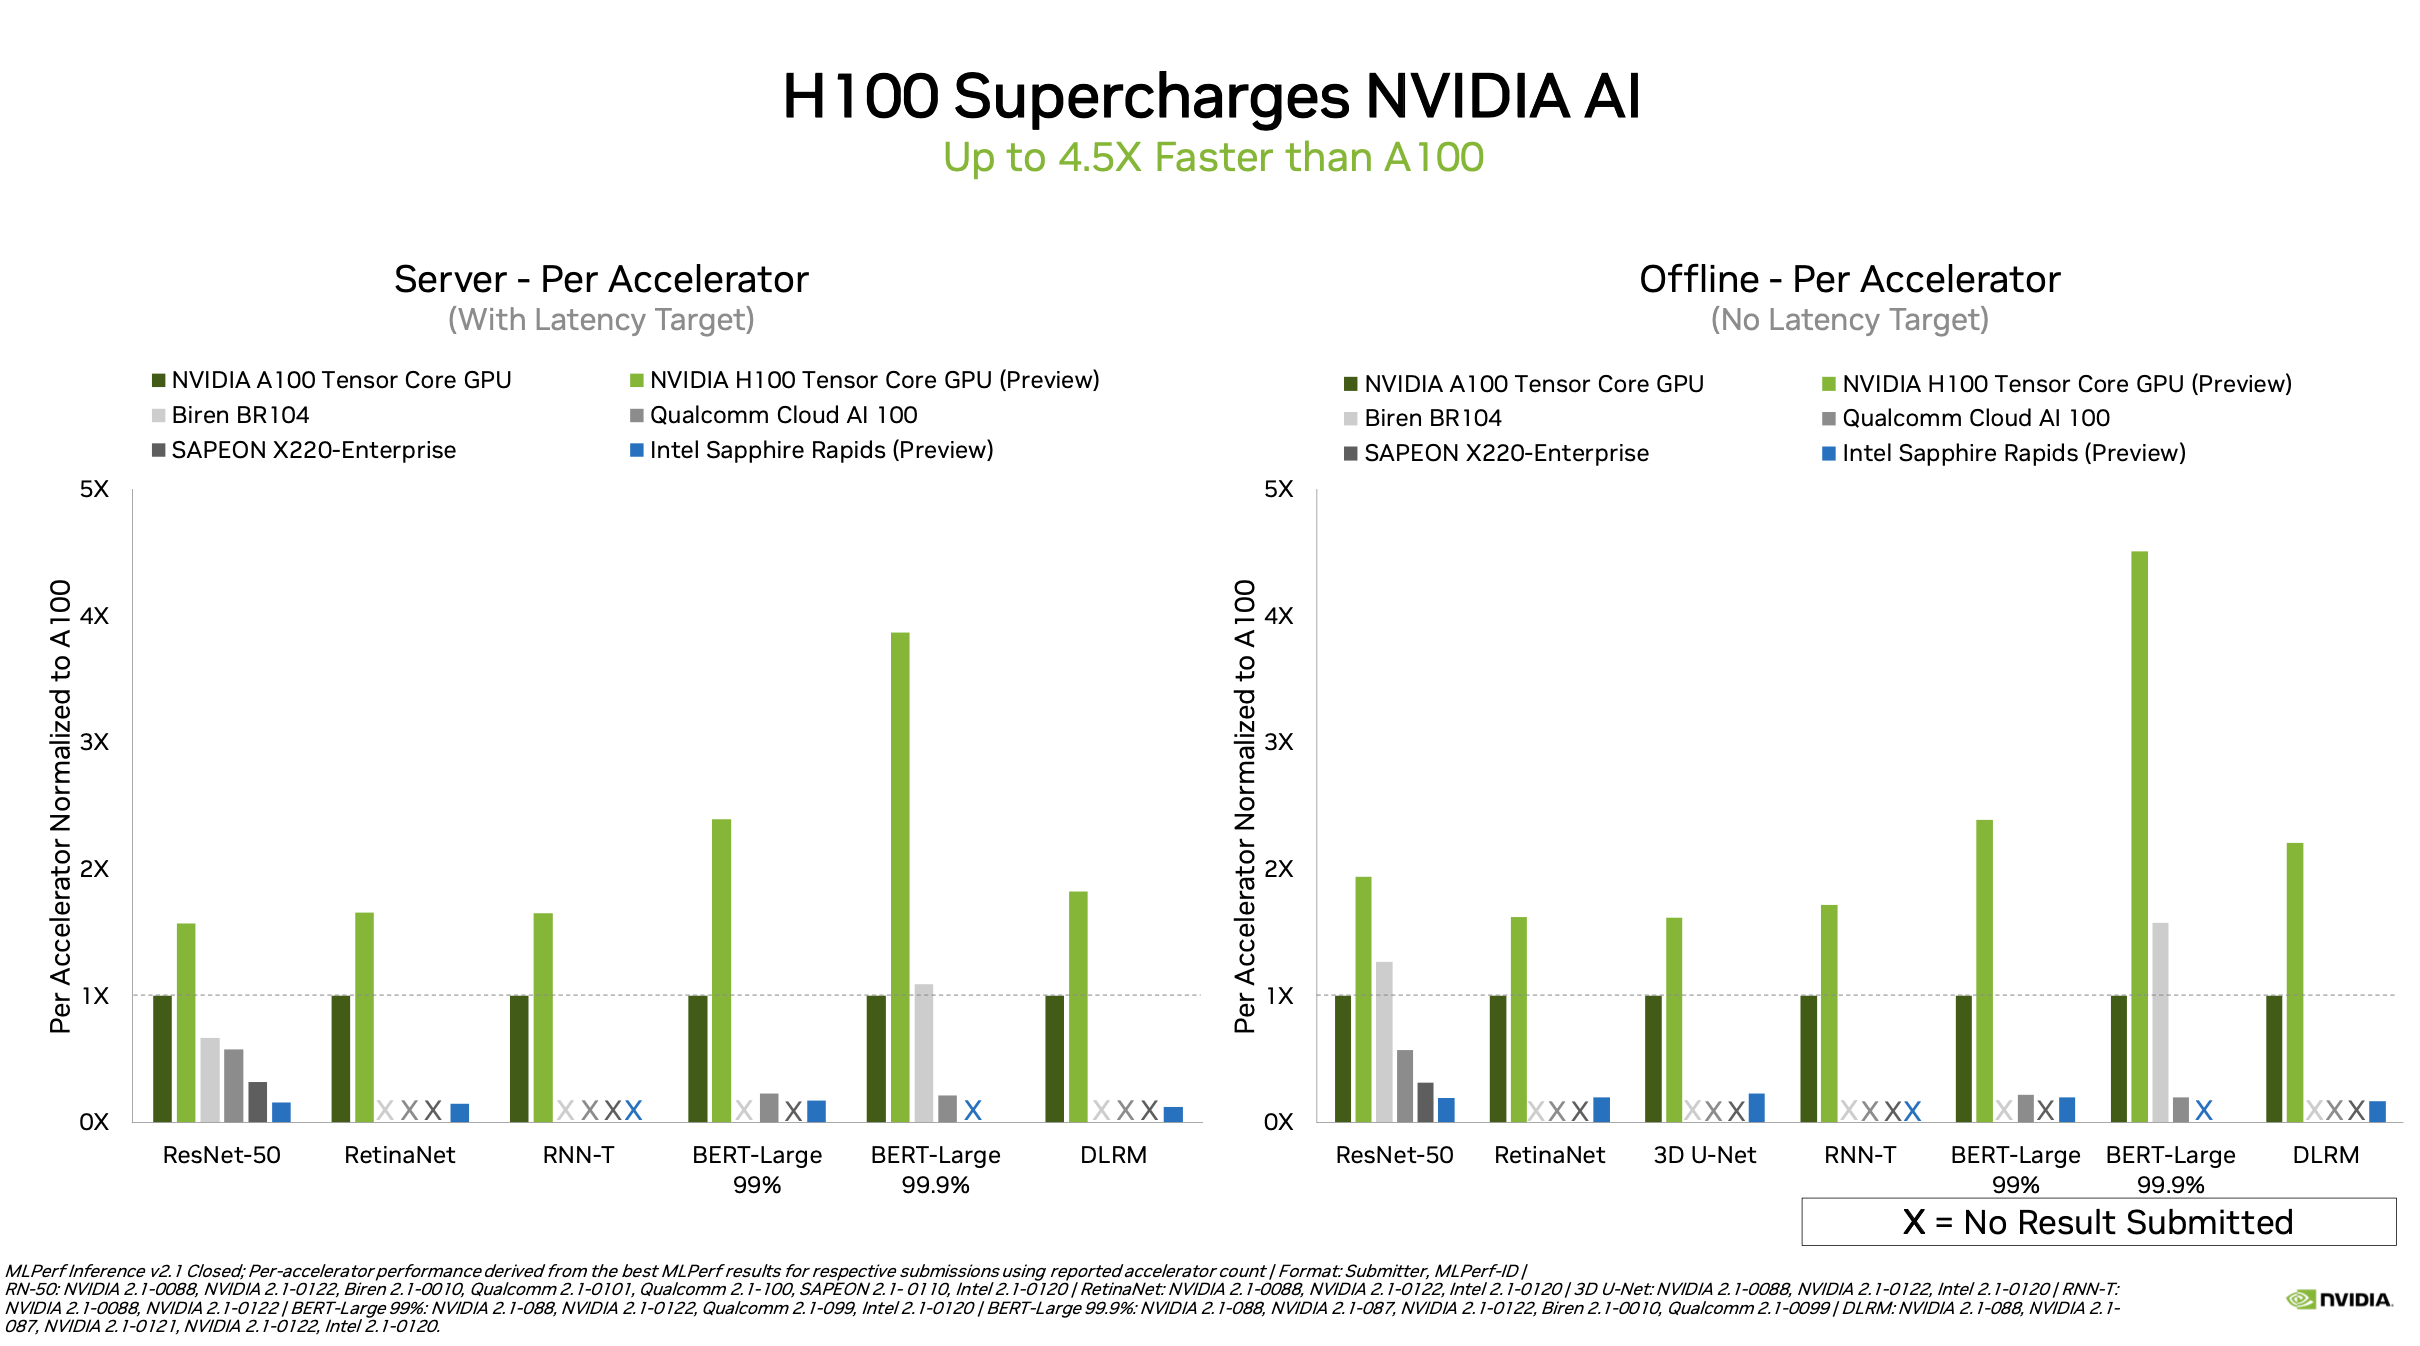 Nvidia Hopper, Ampere GPUs Sweep MLPerf Benchmarks in AI Training